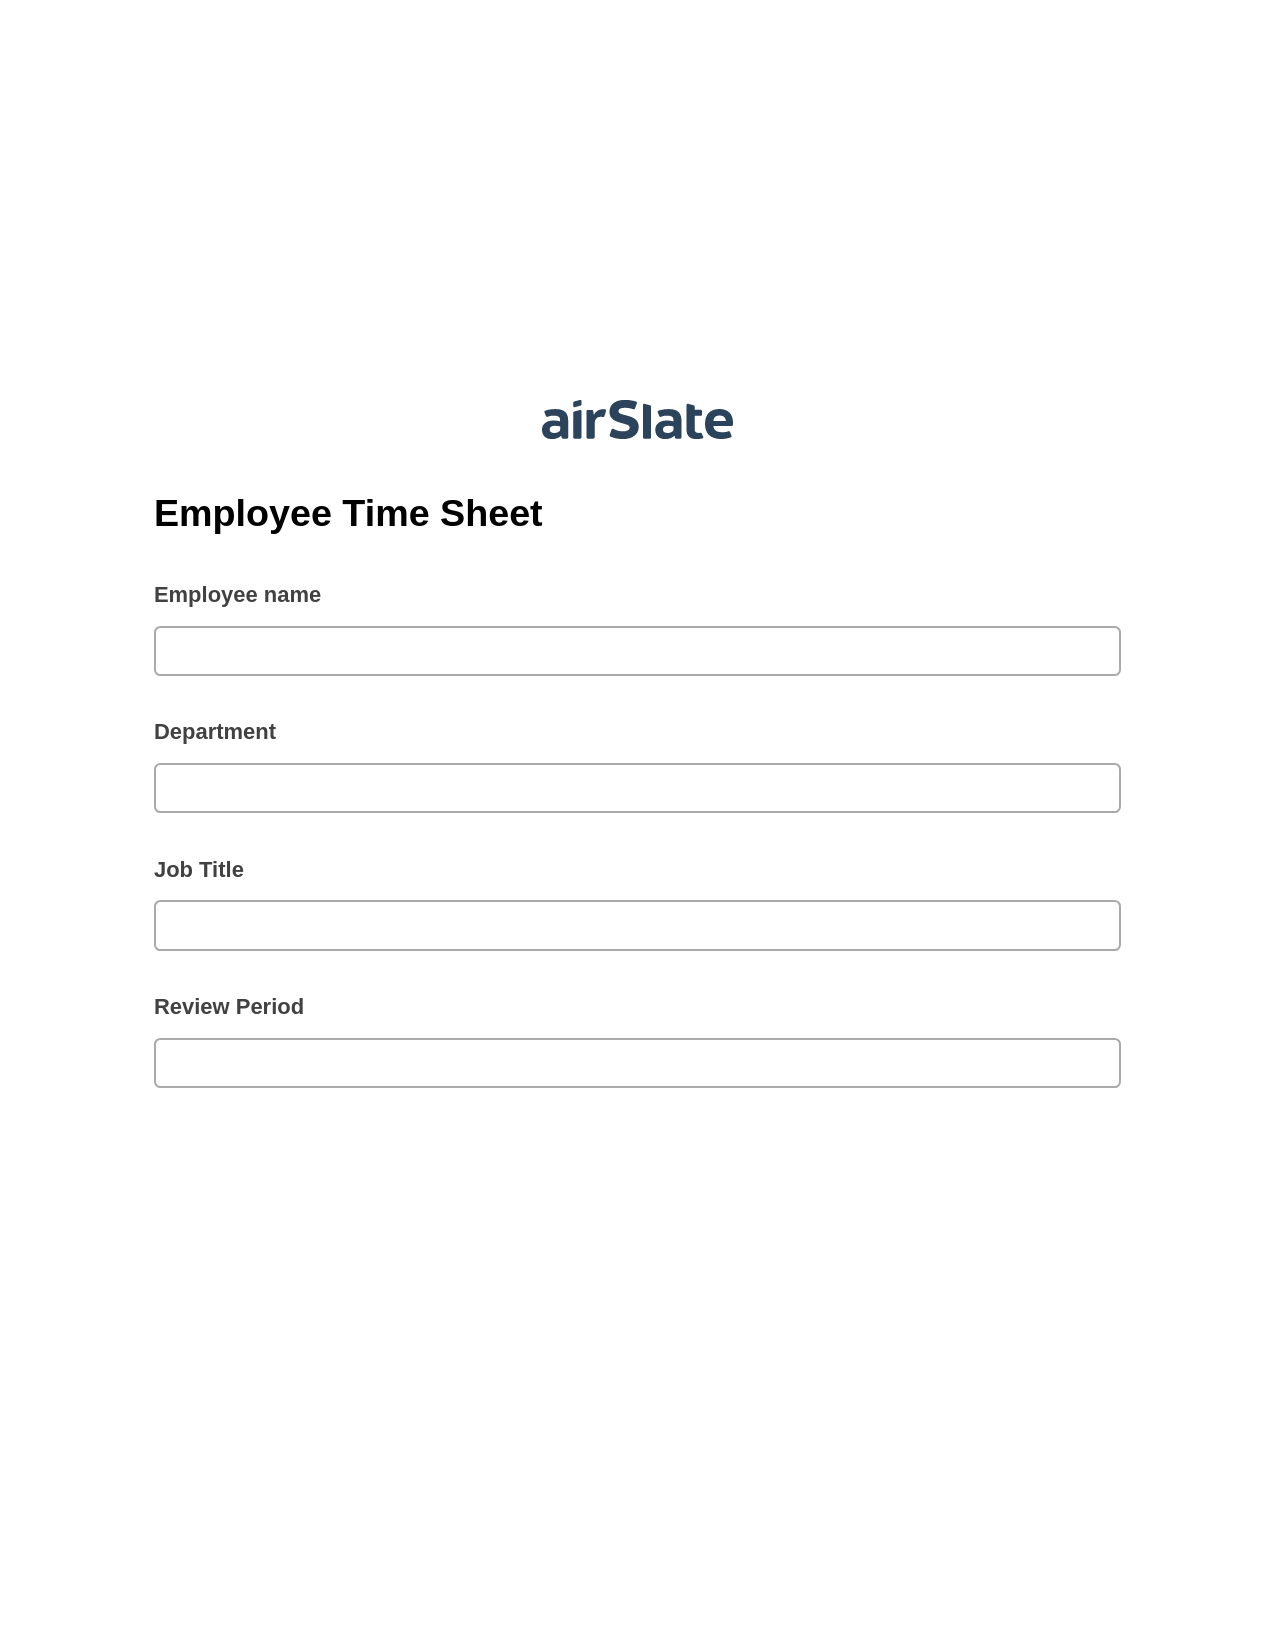 Multirole Employee Time Sheet Pre-fill from CSV File Bot, Create slate addon, Export to NetSuite Bot